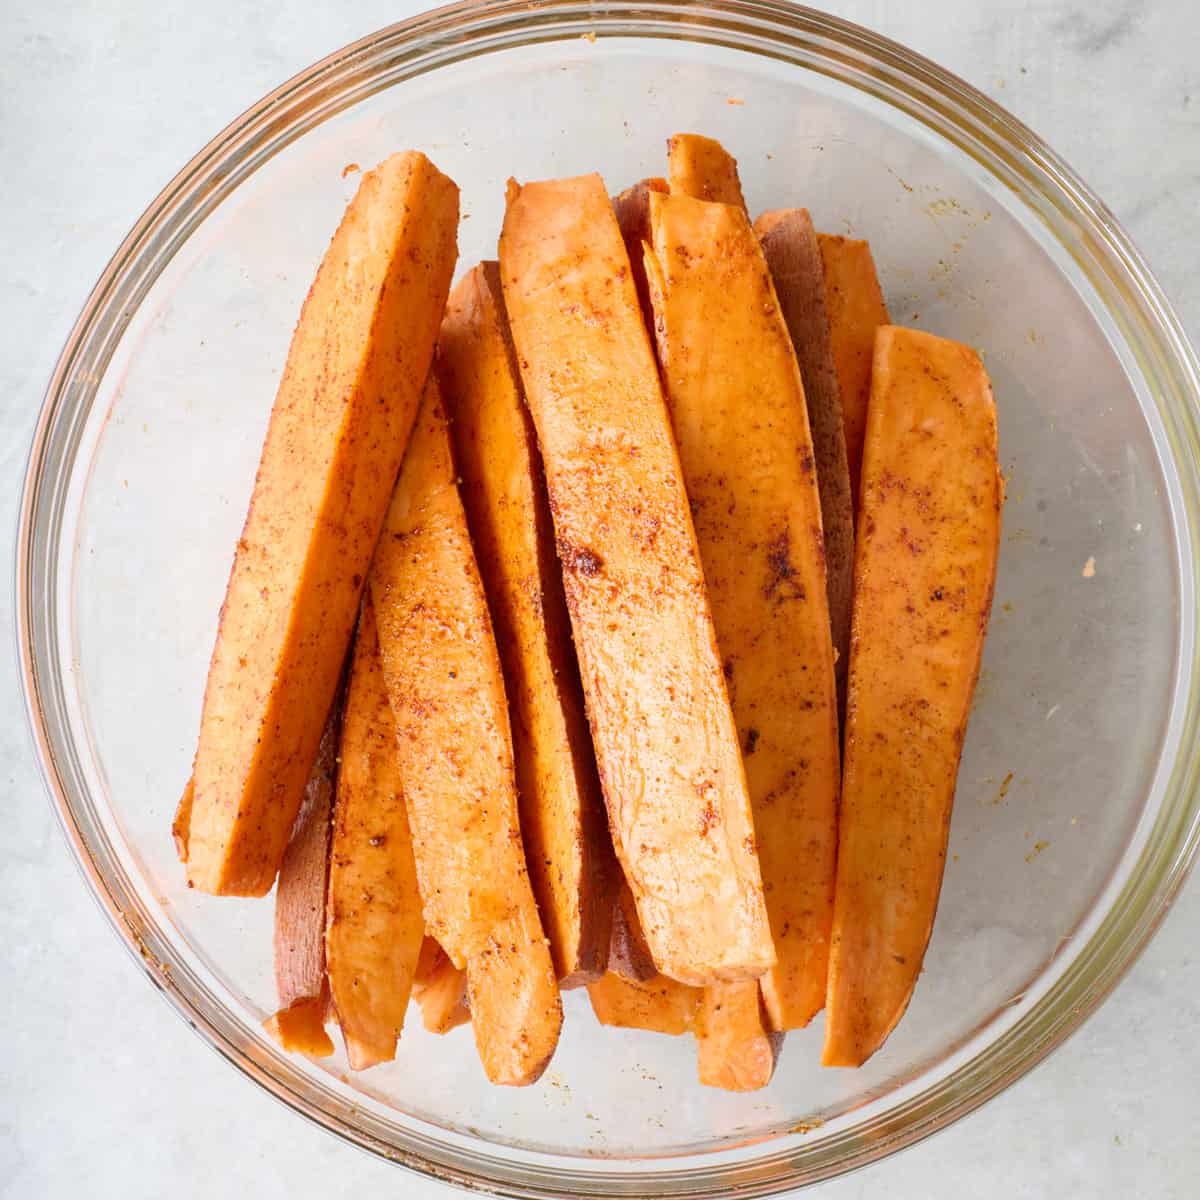 Spiced sweet potato wedges in a bowl.